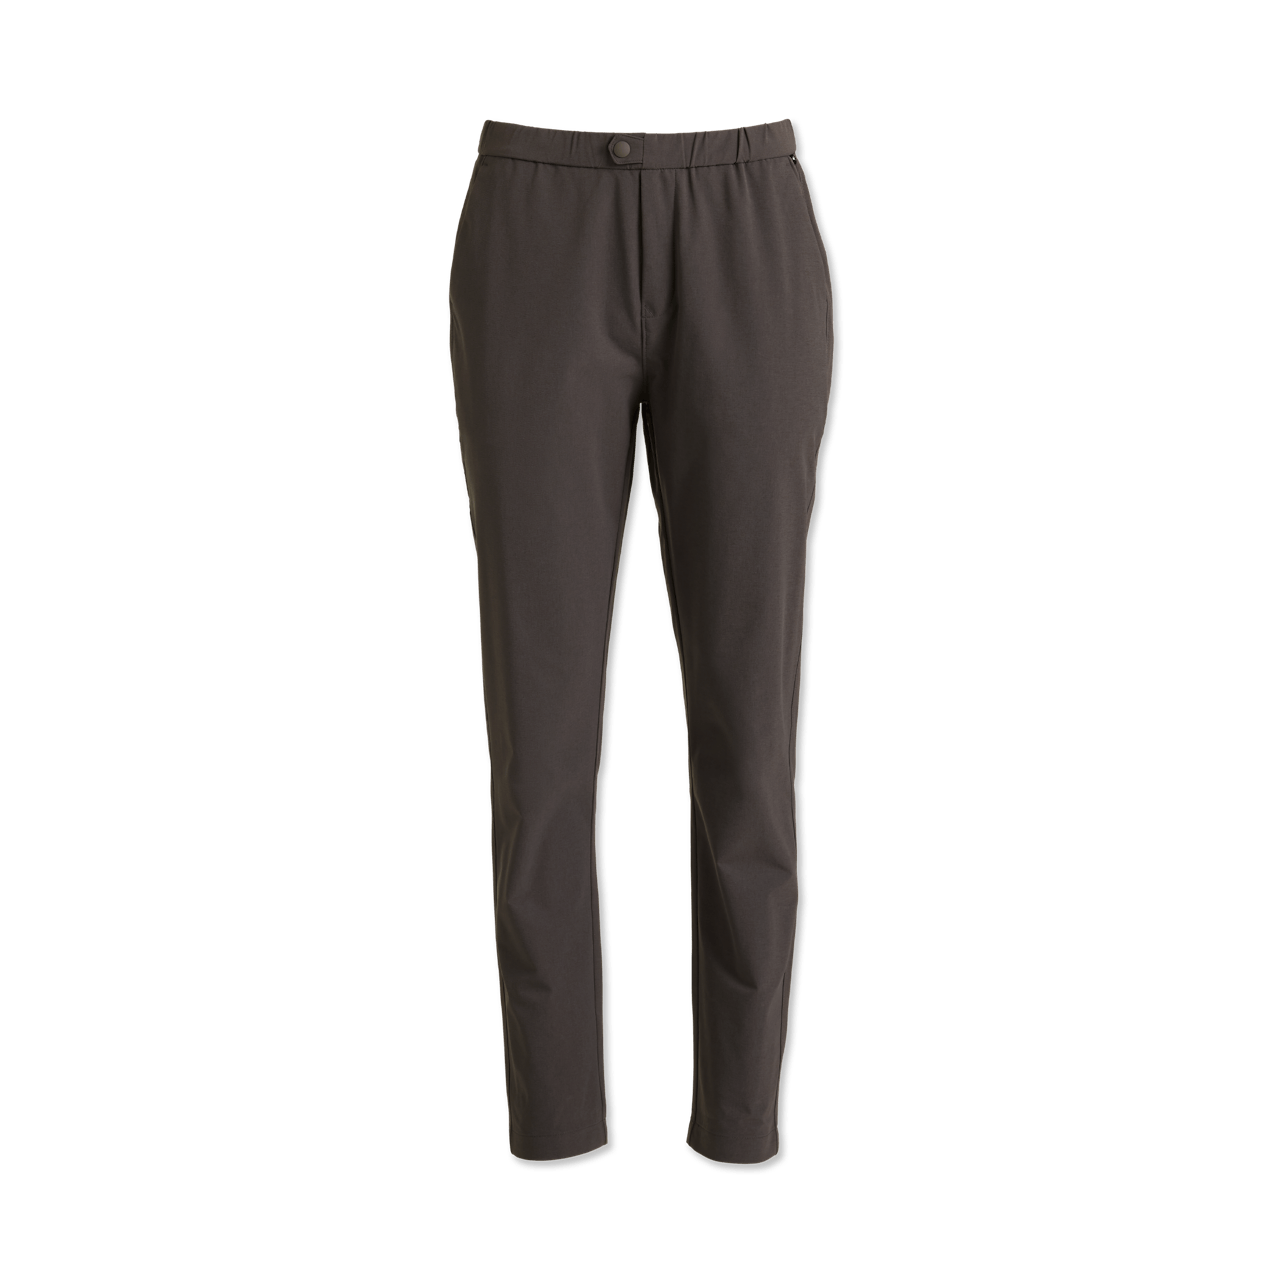 https://tracksmith-media.imgix.net/Spring22-Womens-Rapid-Transit-Pants-Raven-On-Model.png?auto=format,compress&crop=faces&dpr=2&fit=crop&h=640&w=640